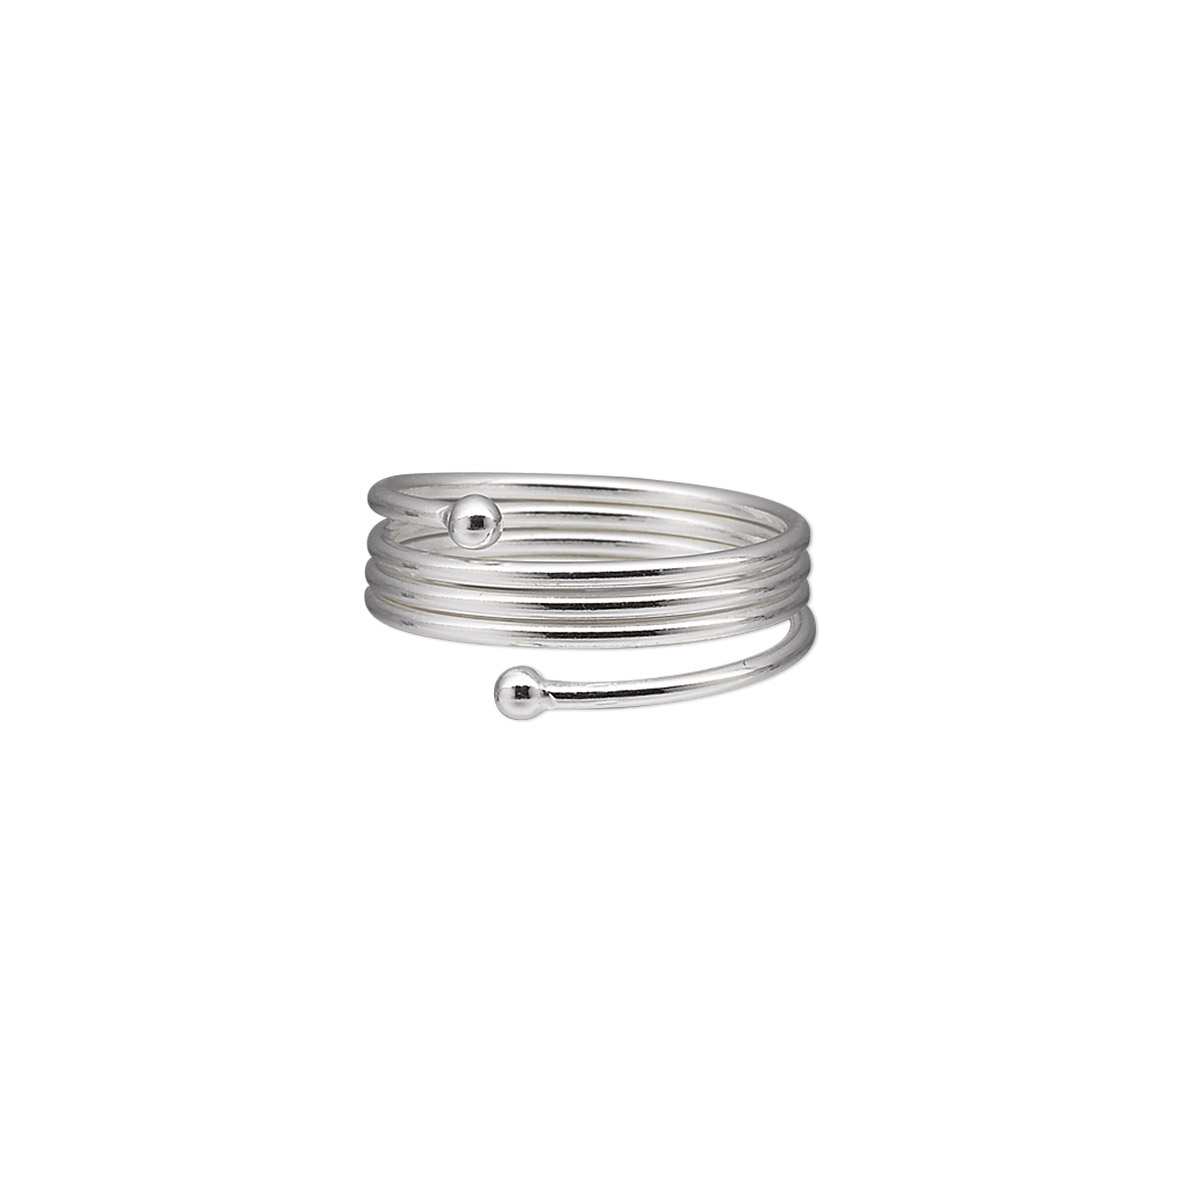 Ring, sterling silver, 5-8mm wire spring, adjustable. Sold individually ...